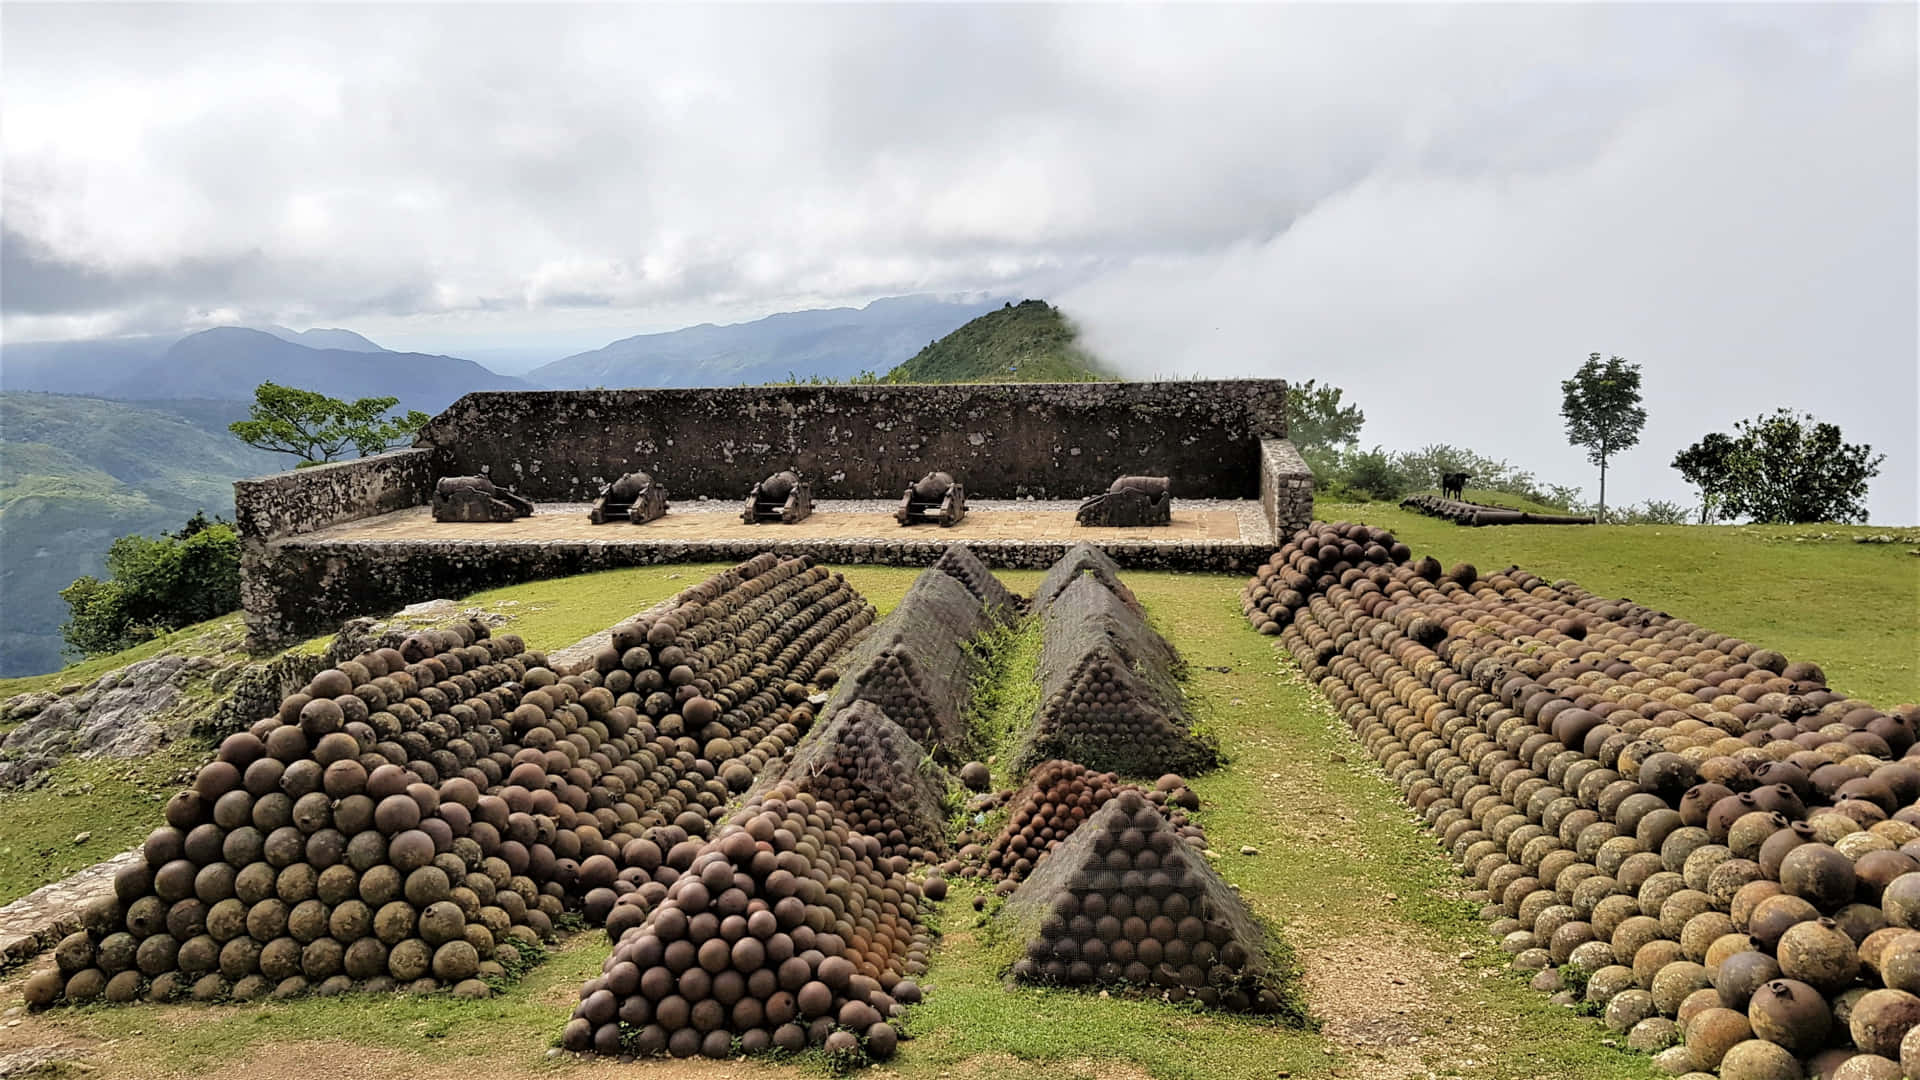 ".Forty two preserved cannonballs stand in a pile at Citadelle Laferriere, Haiti." Wallpaper